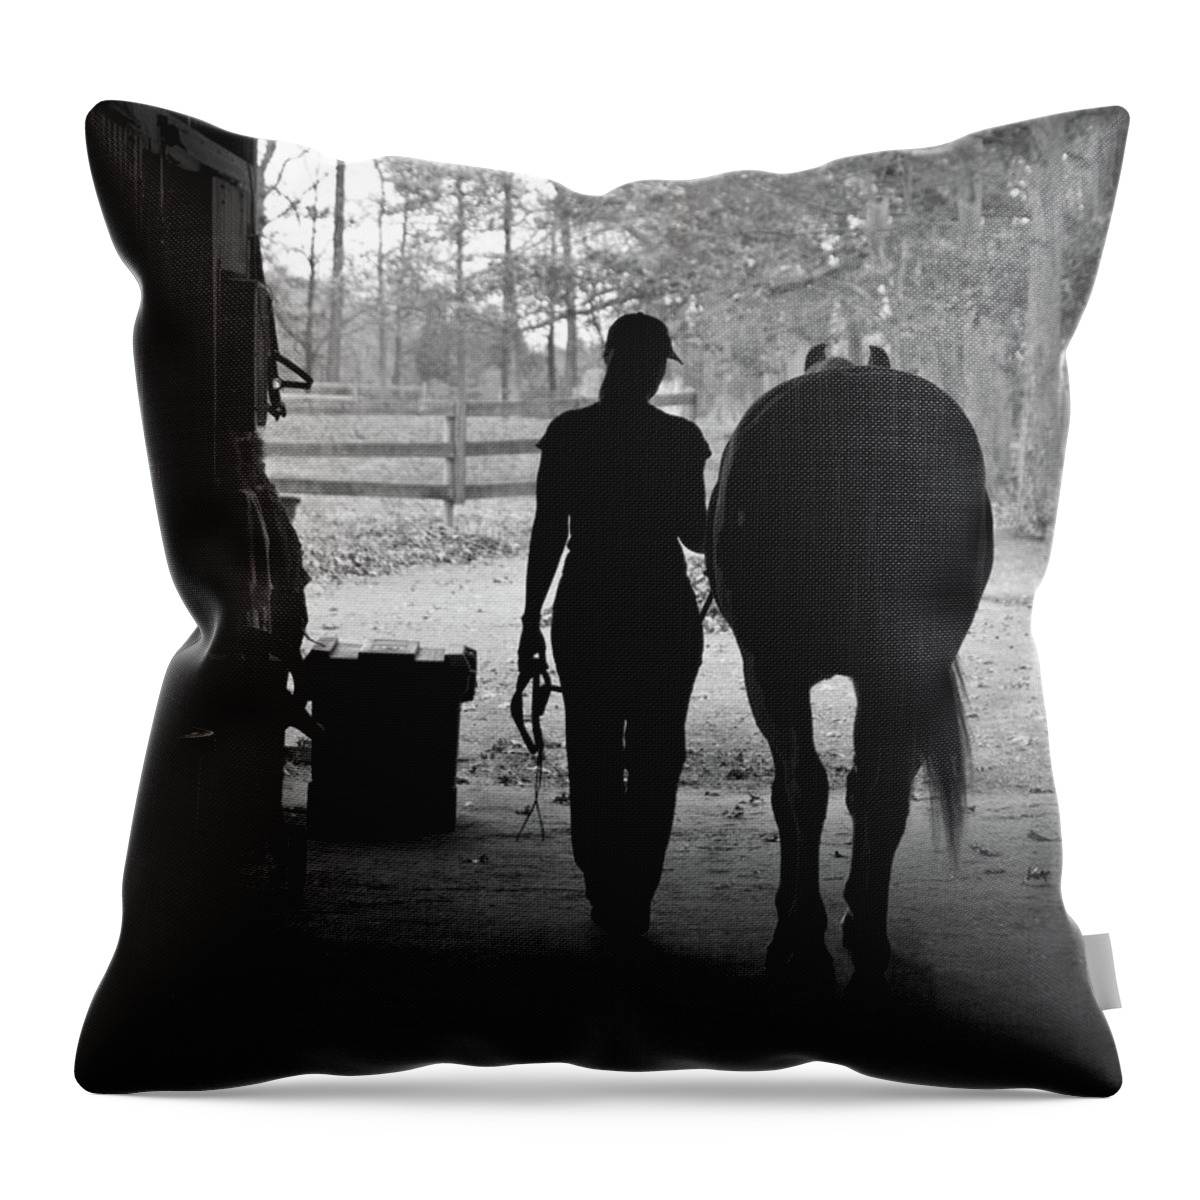 Horses Throw Pillow featuring the photograph Day's End by Minnie Gallman